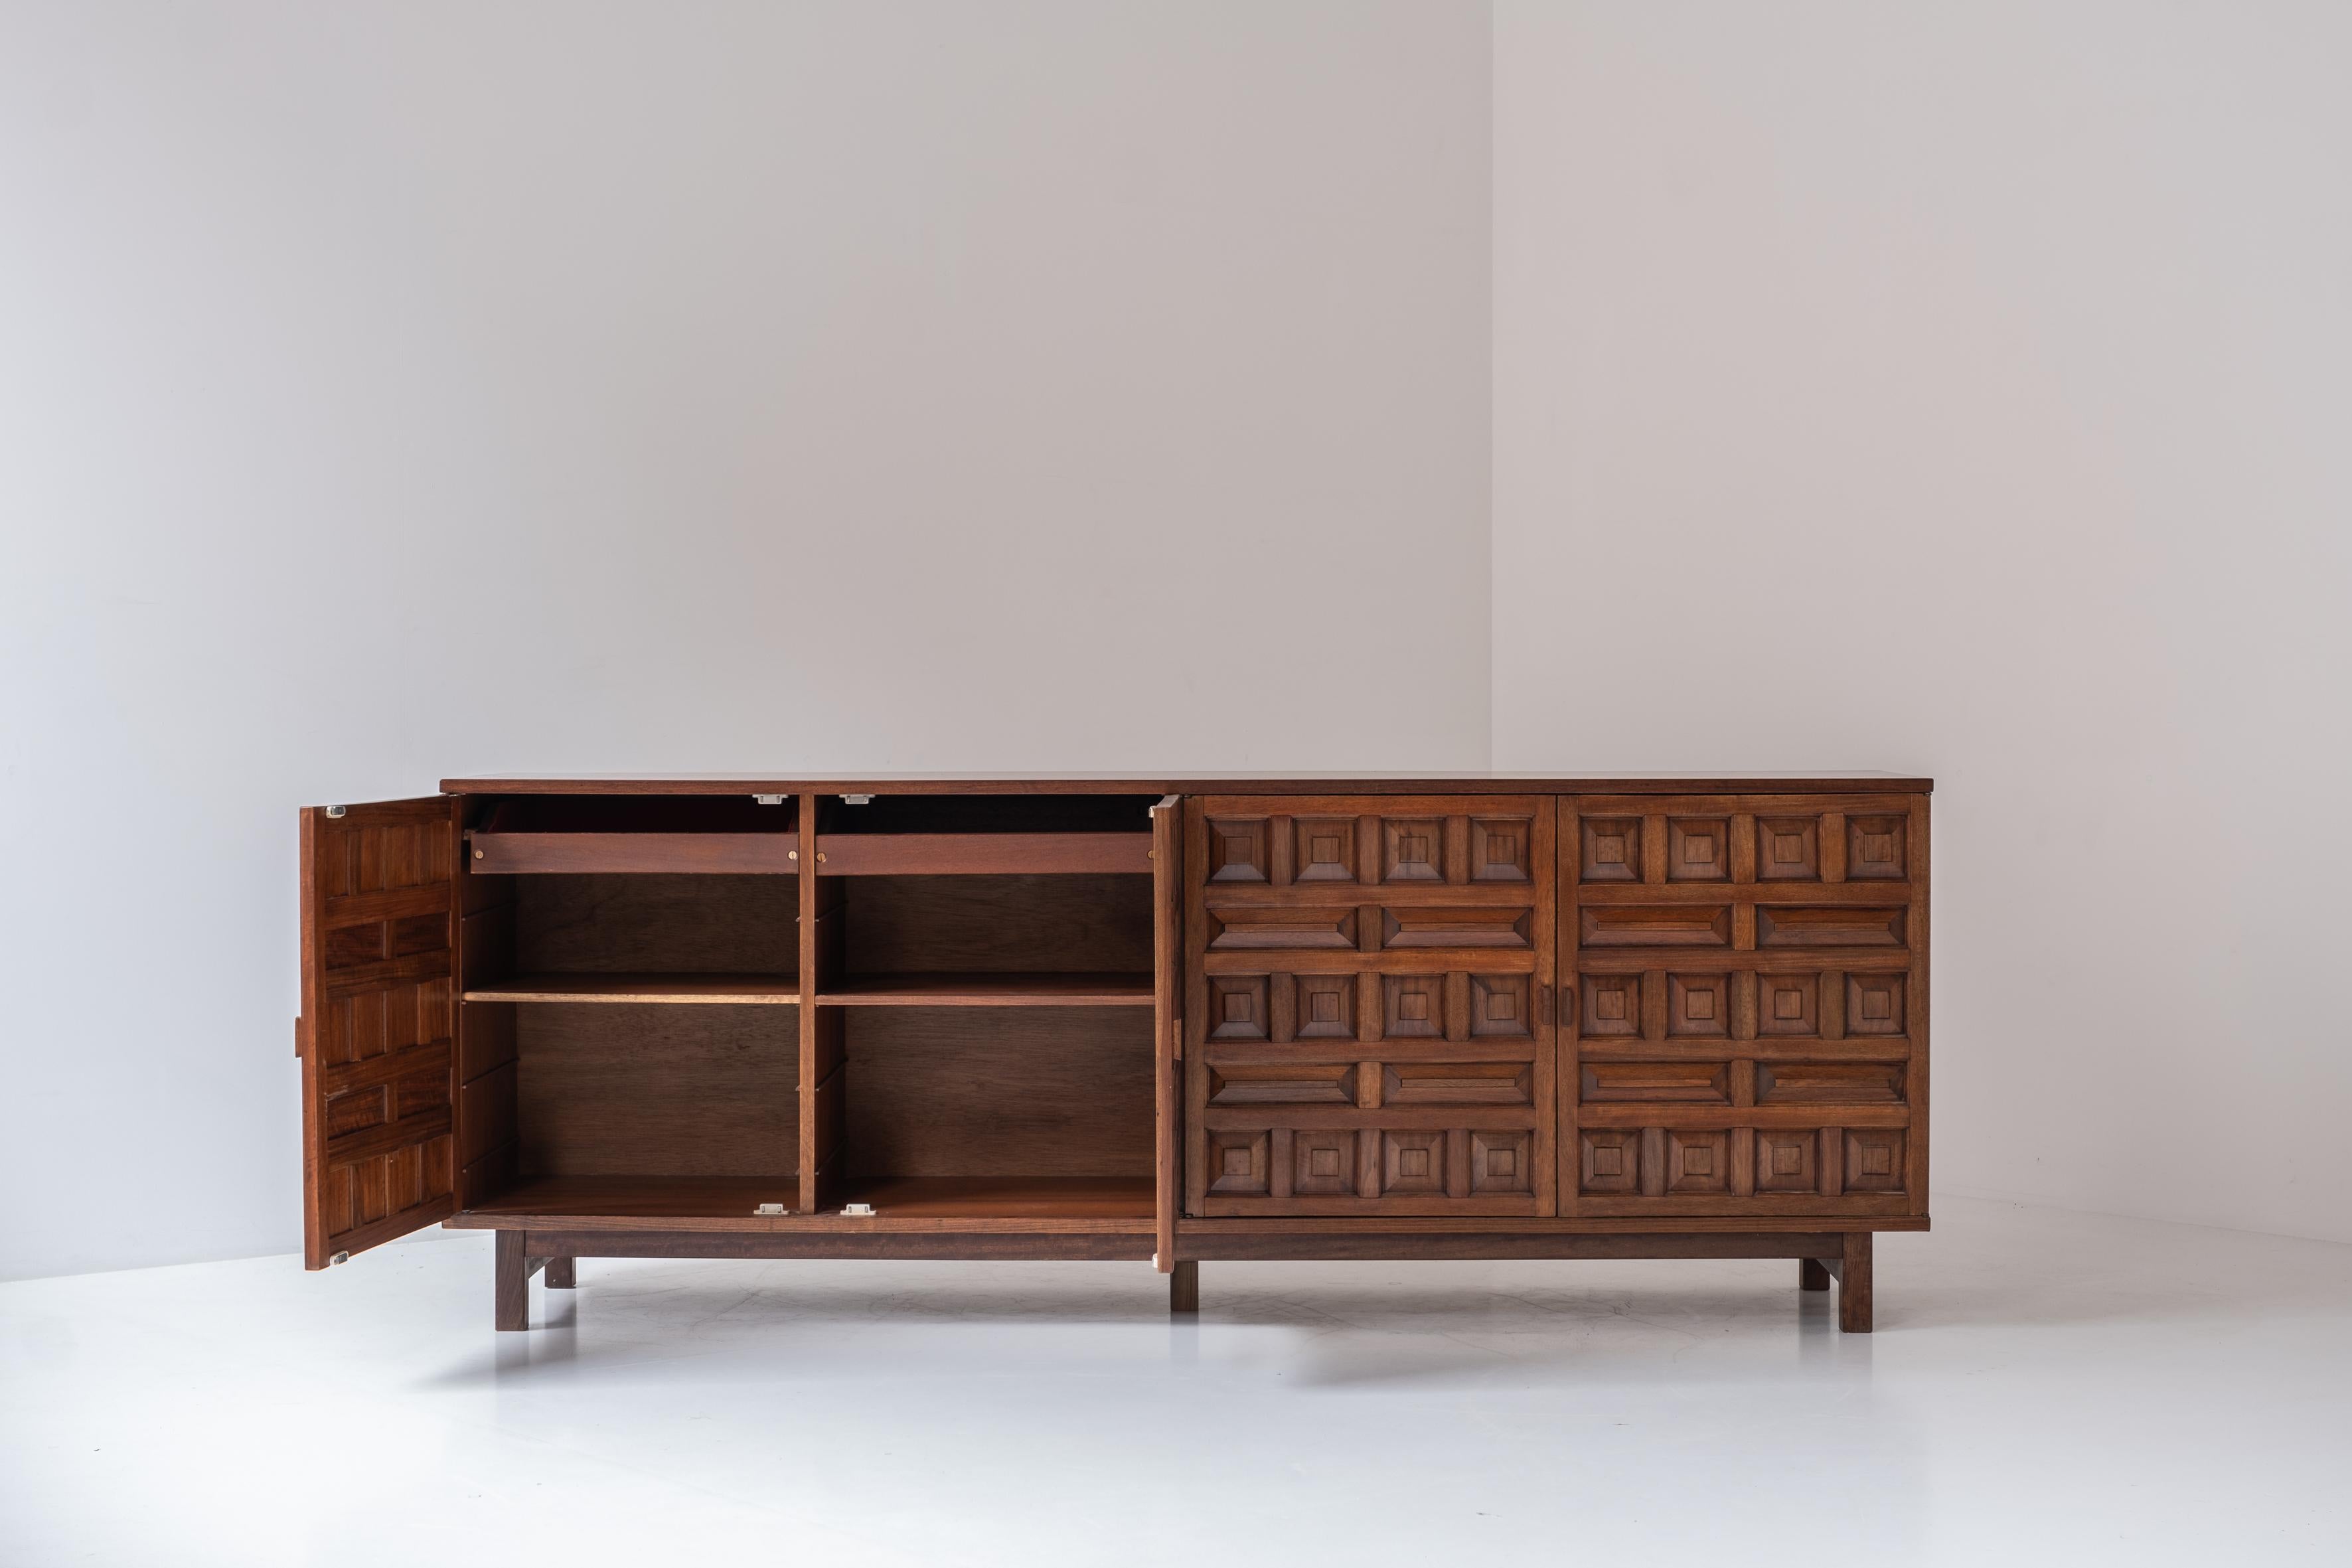 Mid-Century Modern Brutalist sideboard from Spain, designed and manufactured in the 1970s.